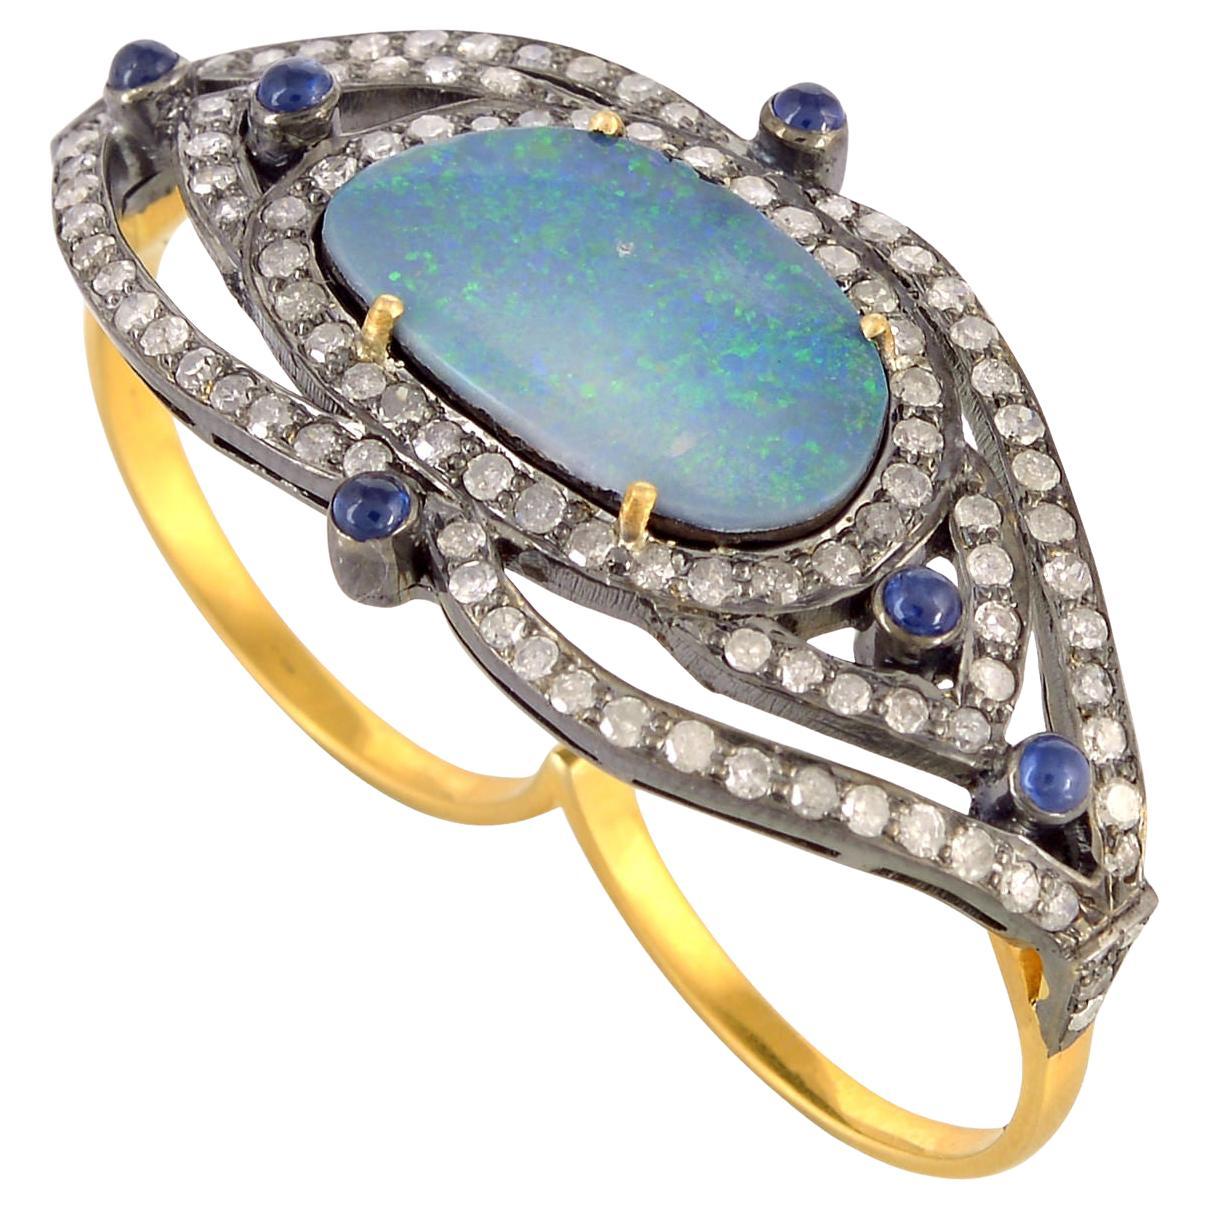 Opal Cocktail Ring With Blue Sapphire & Diamonds Made In 18k Gold & Silver